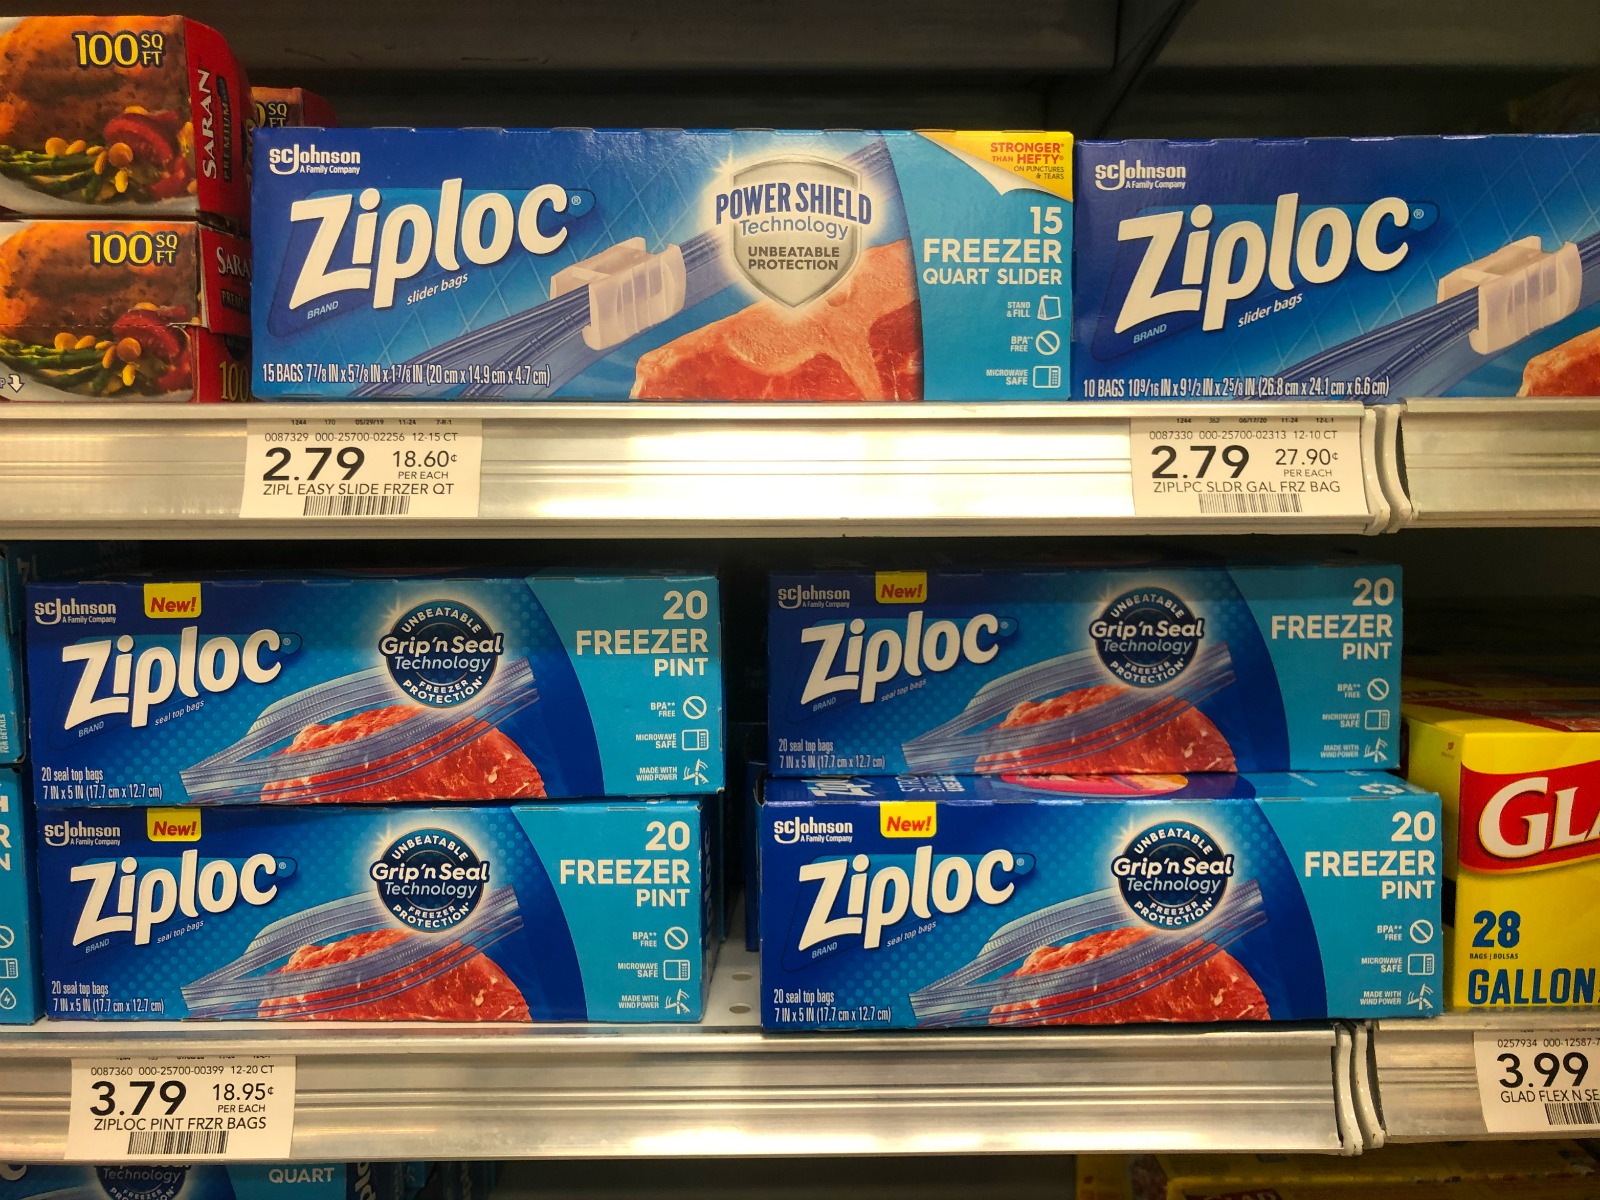 Store Frozen Foods For Longer With Ziploc® Brand Freezer Bags - Enjoy Your Favorite Meals Whenever You Want! on I Heart Publix